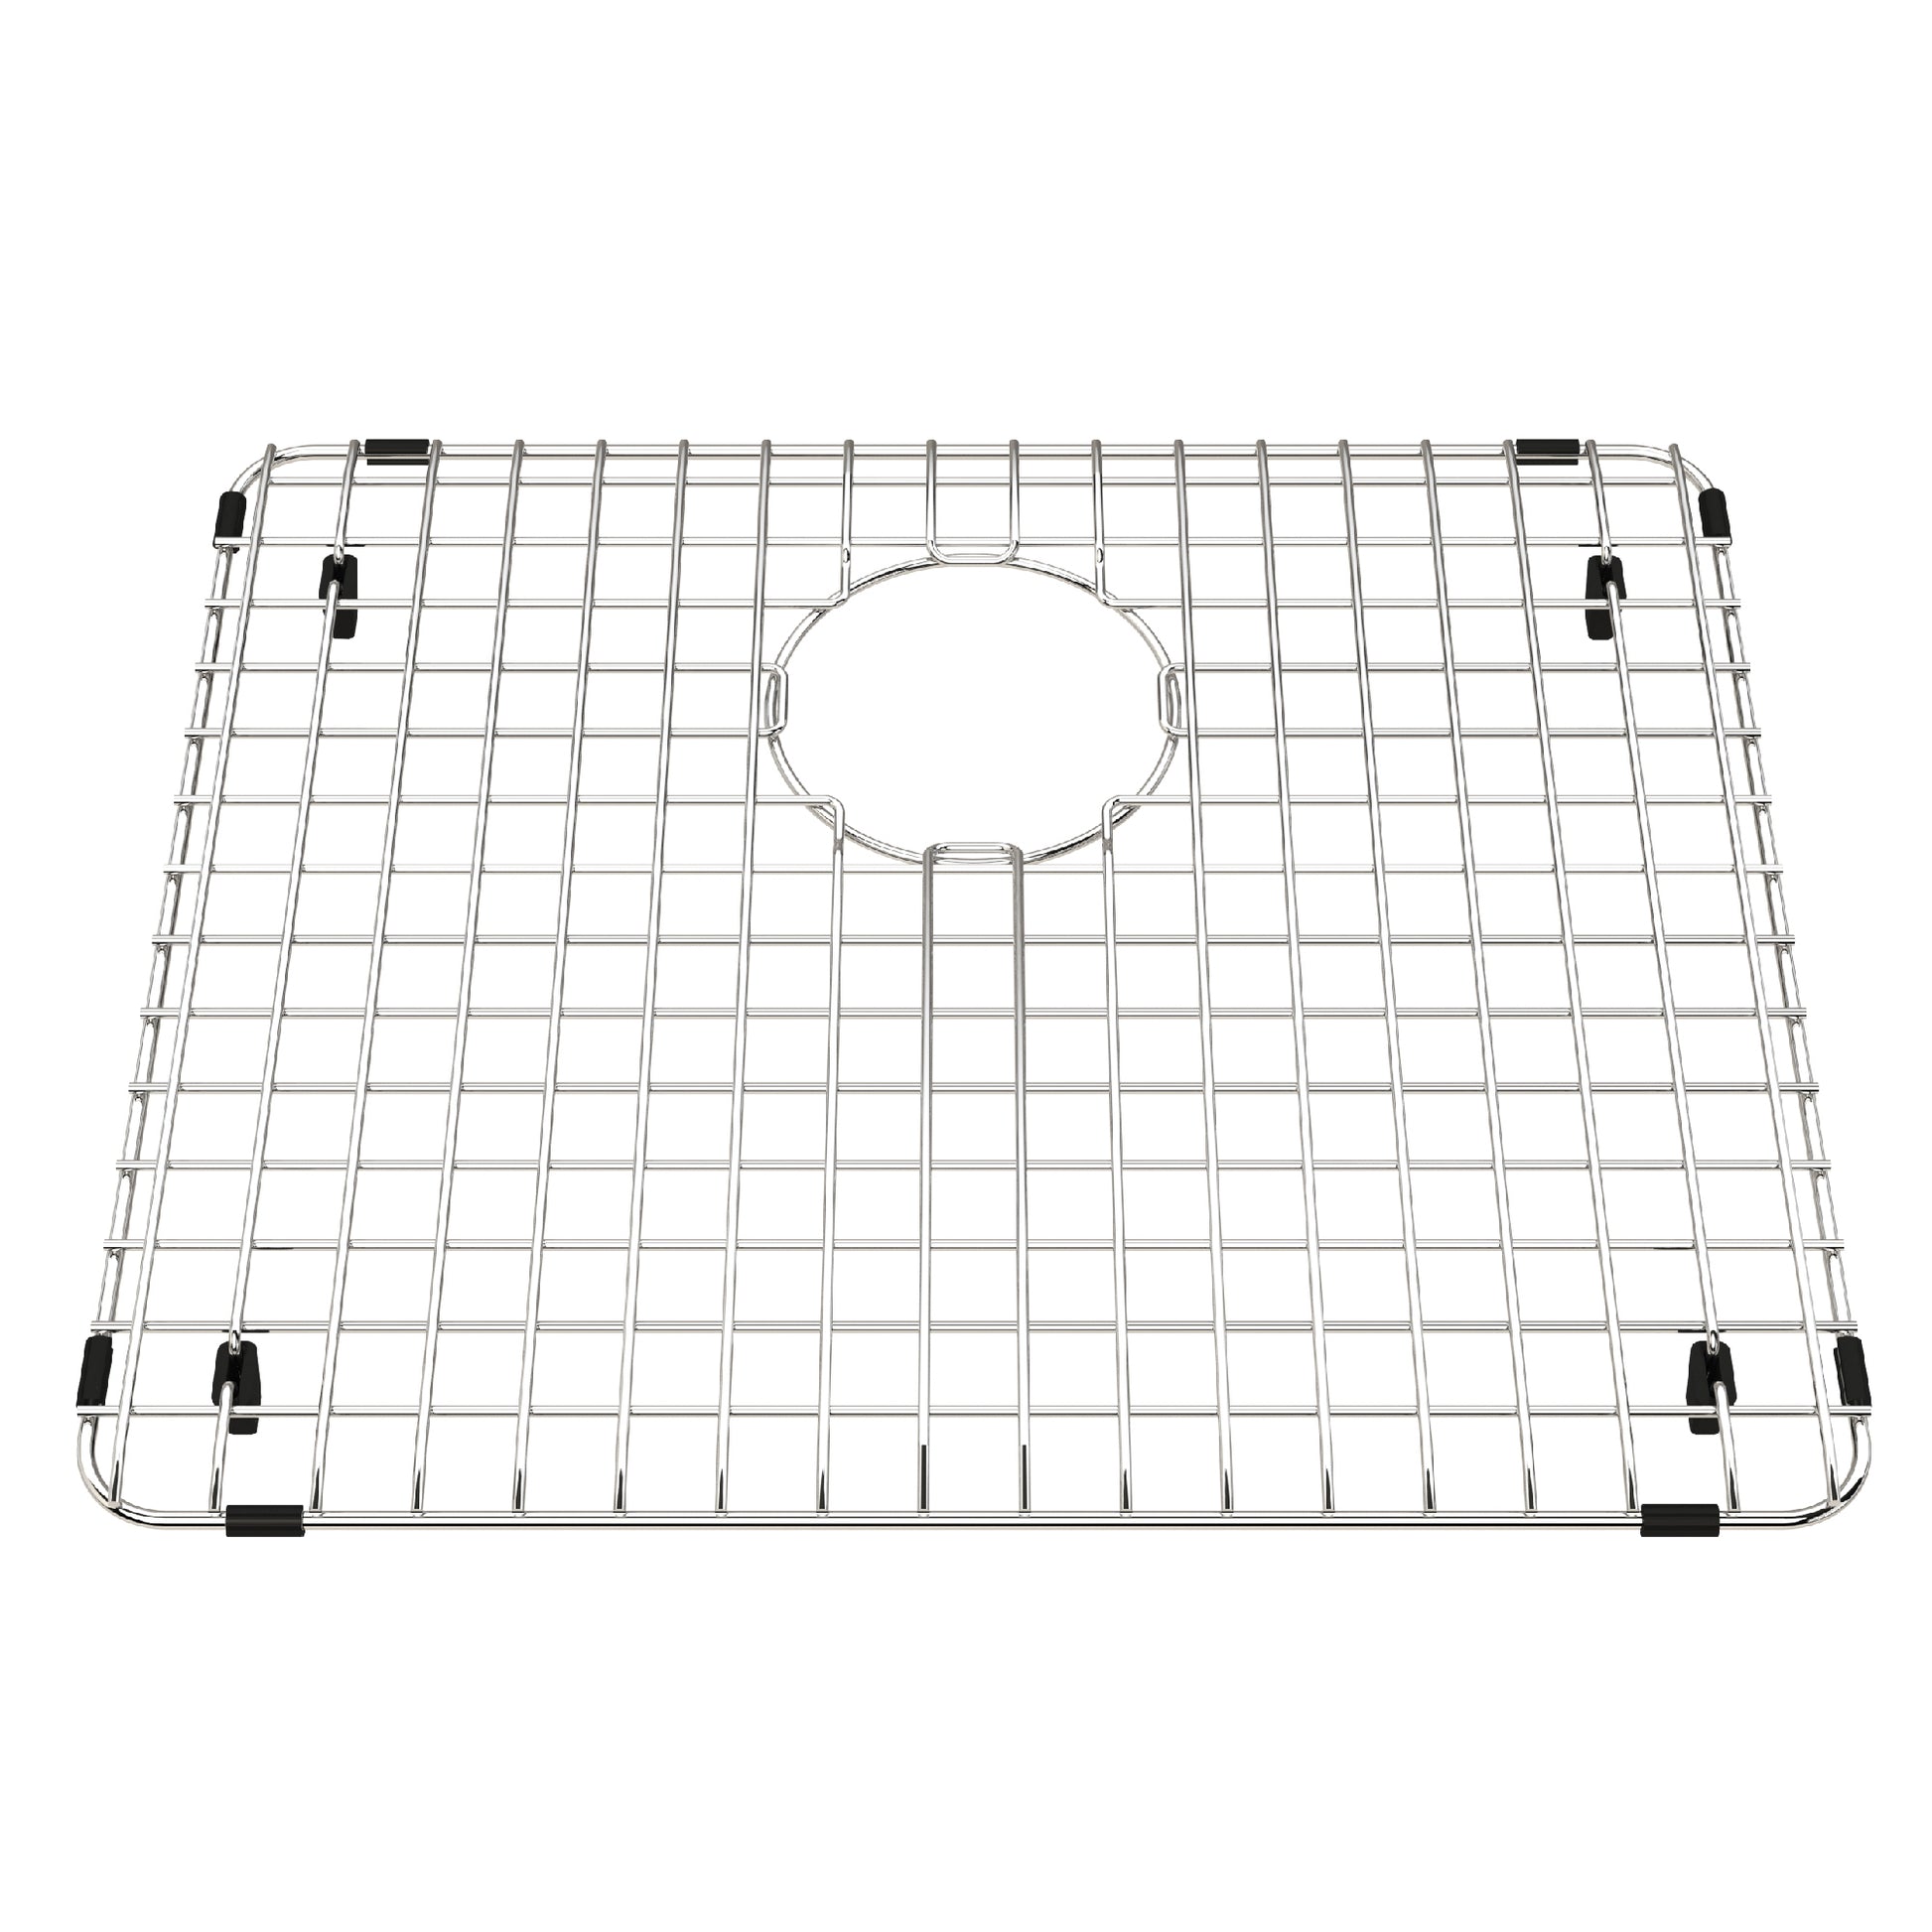 KINDRED BG14S Stainless Steel Bottom Grid for Sink 15-in x 18-in In Stainless Steel